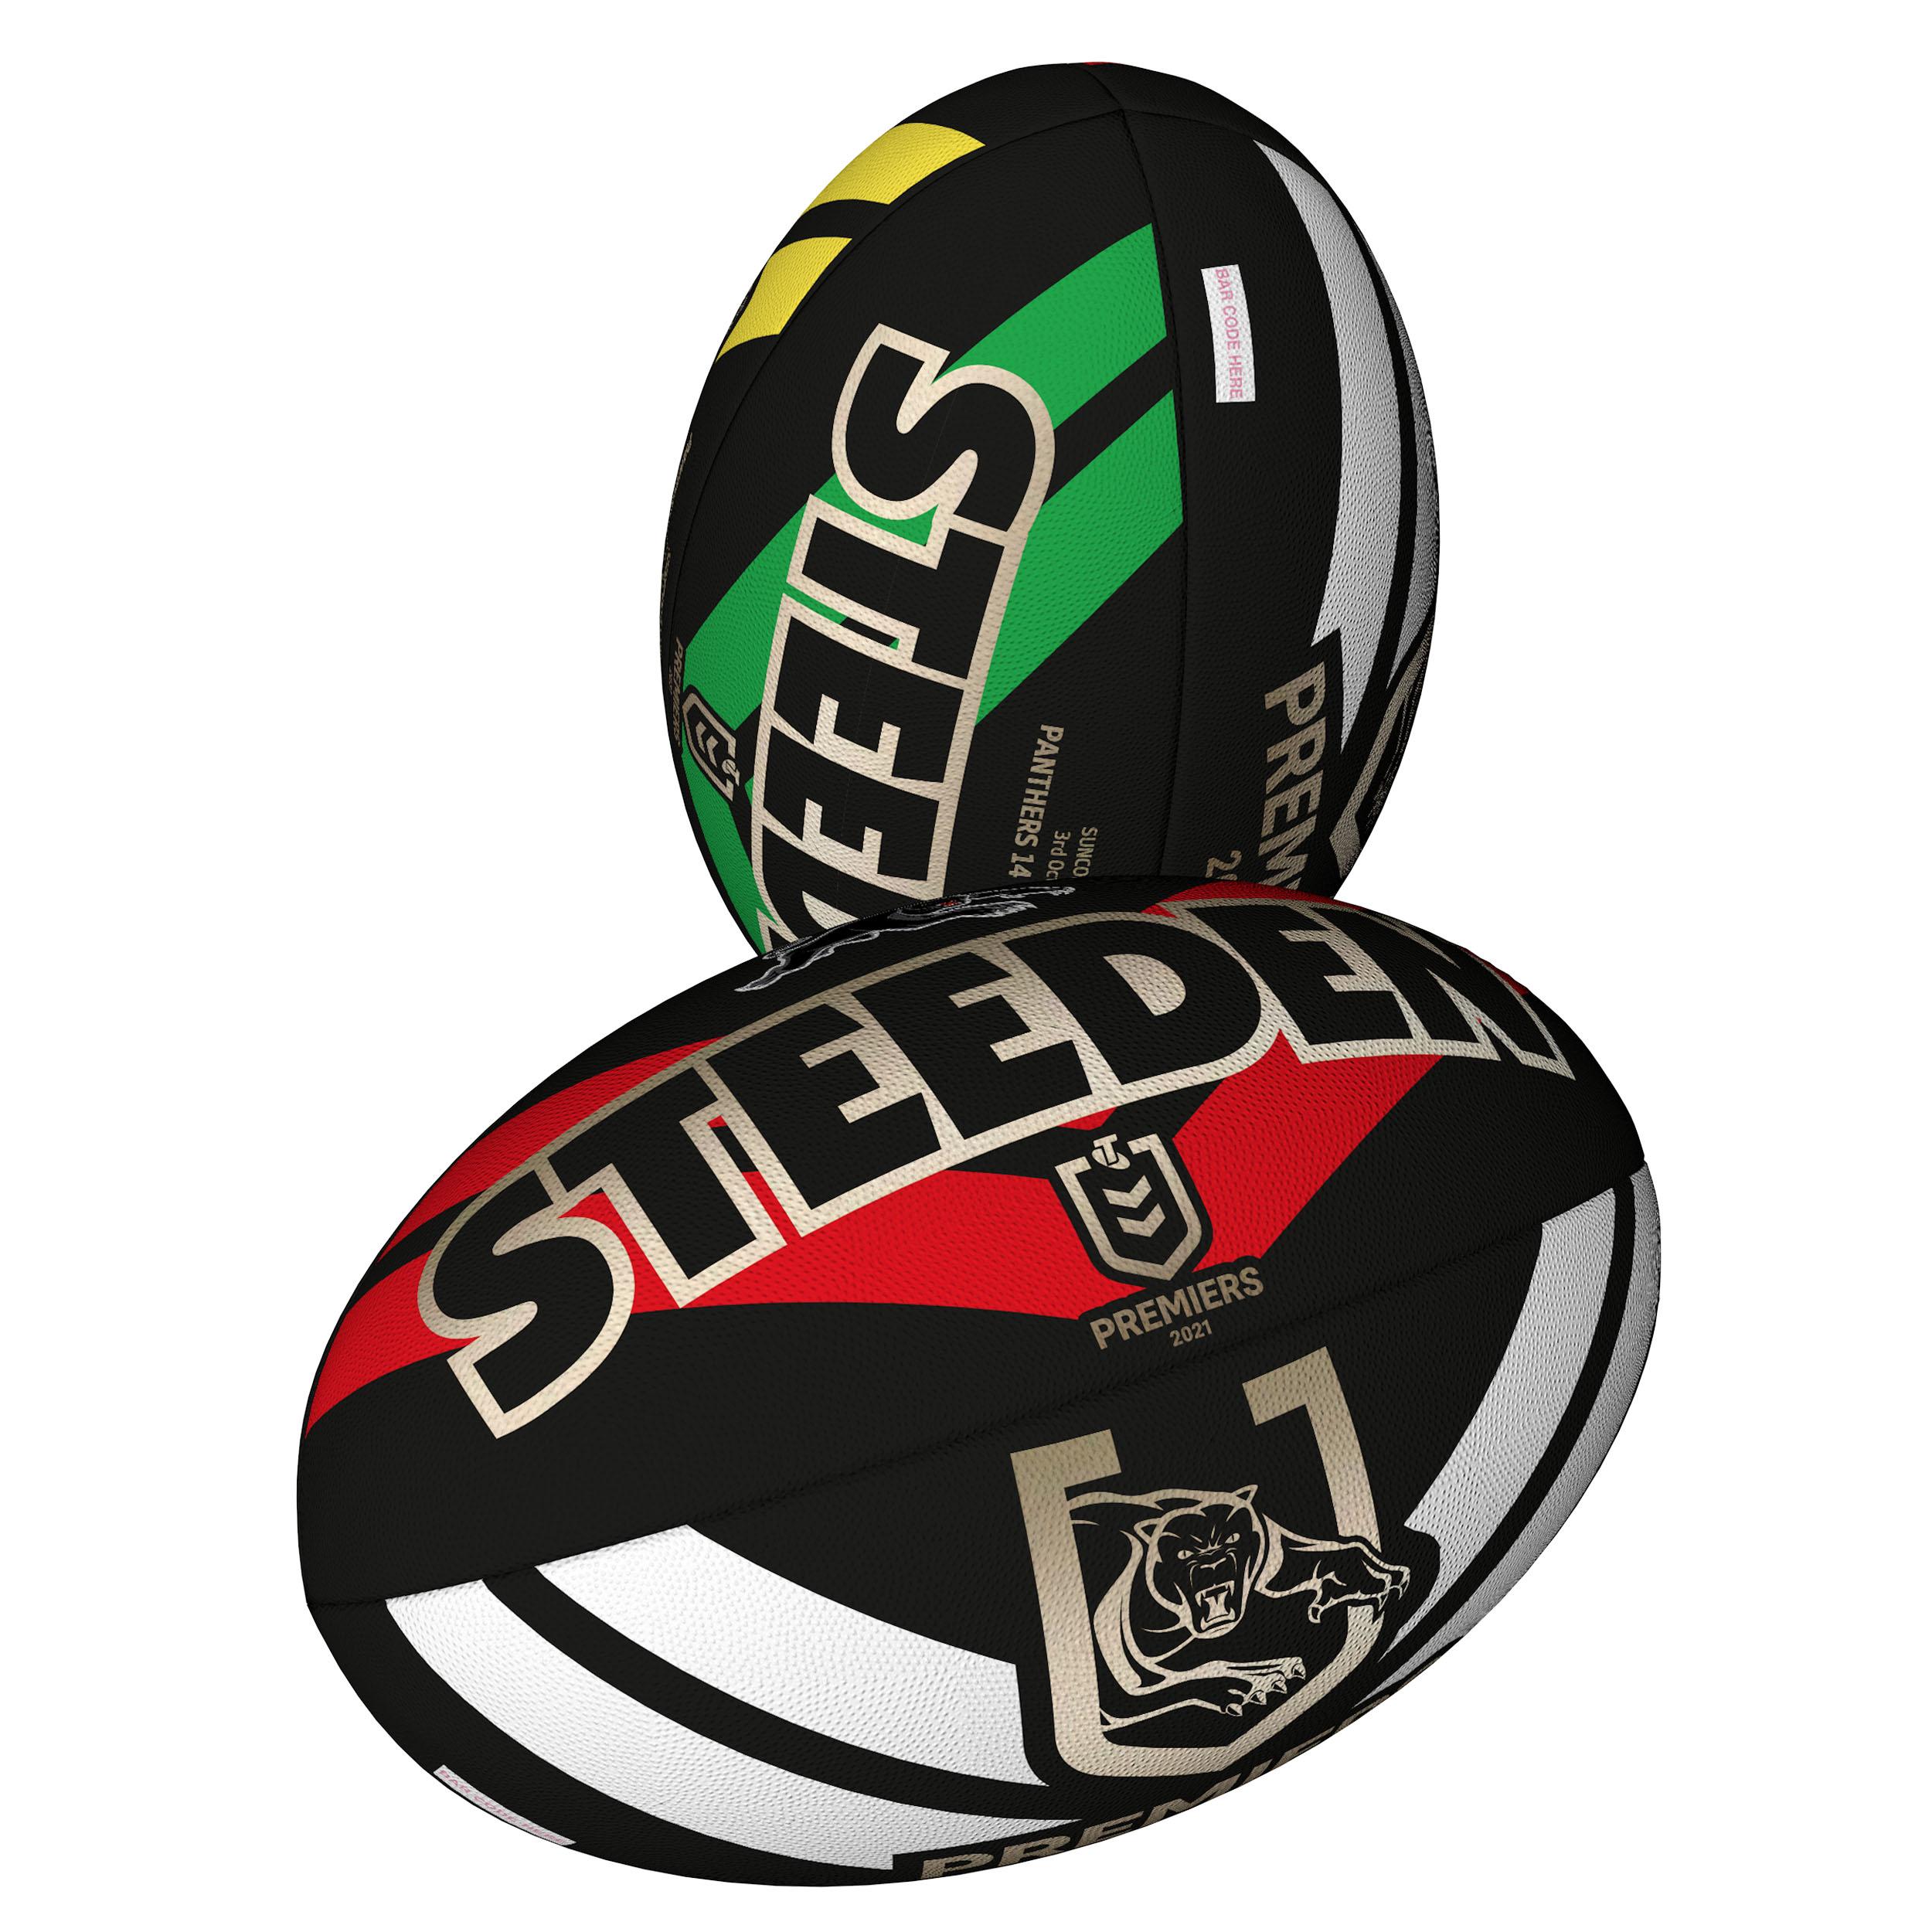 PRE ORDER - Penrith Panthers 2021 NRL Premiers Full Size 5 Large Football Foot Ball Footy